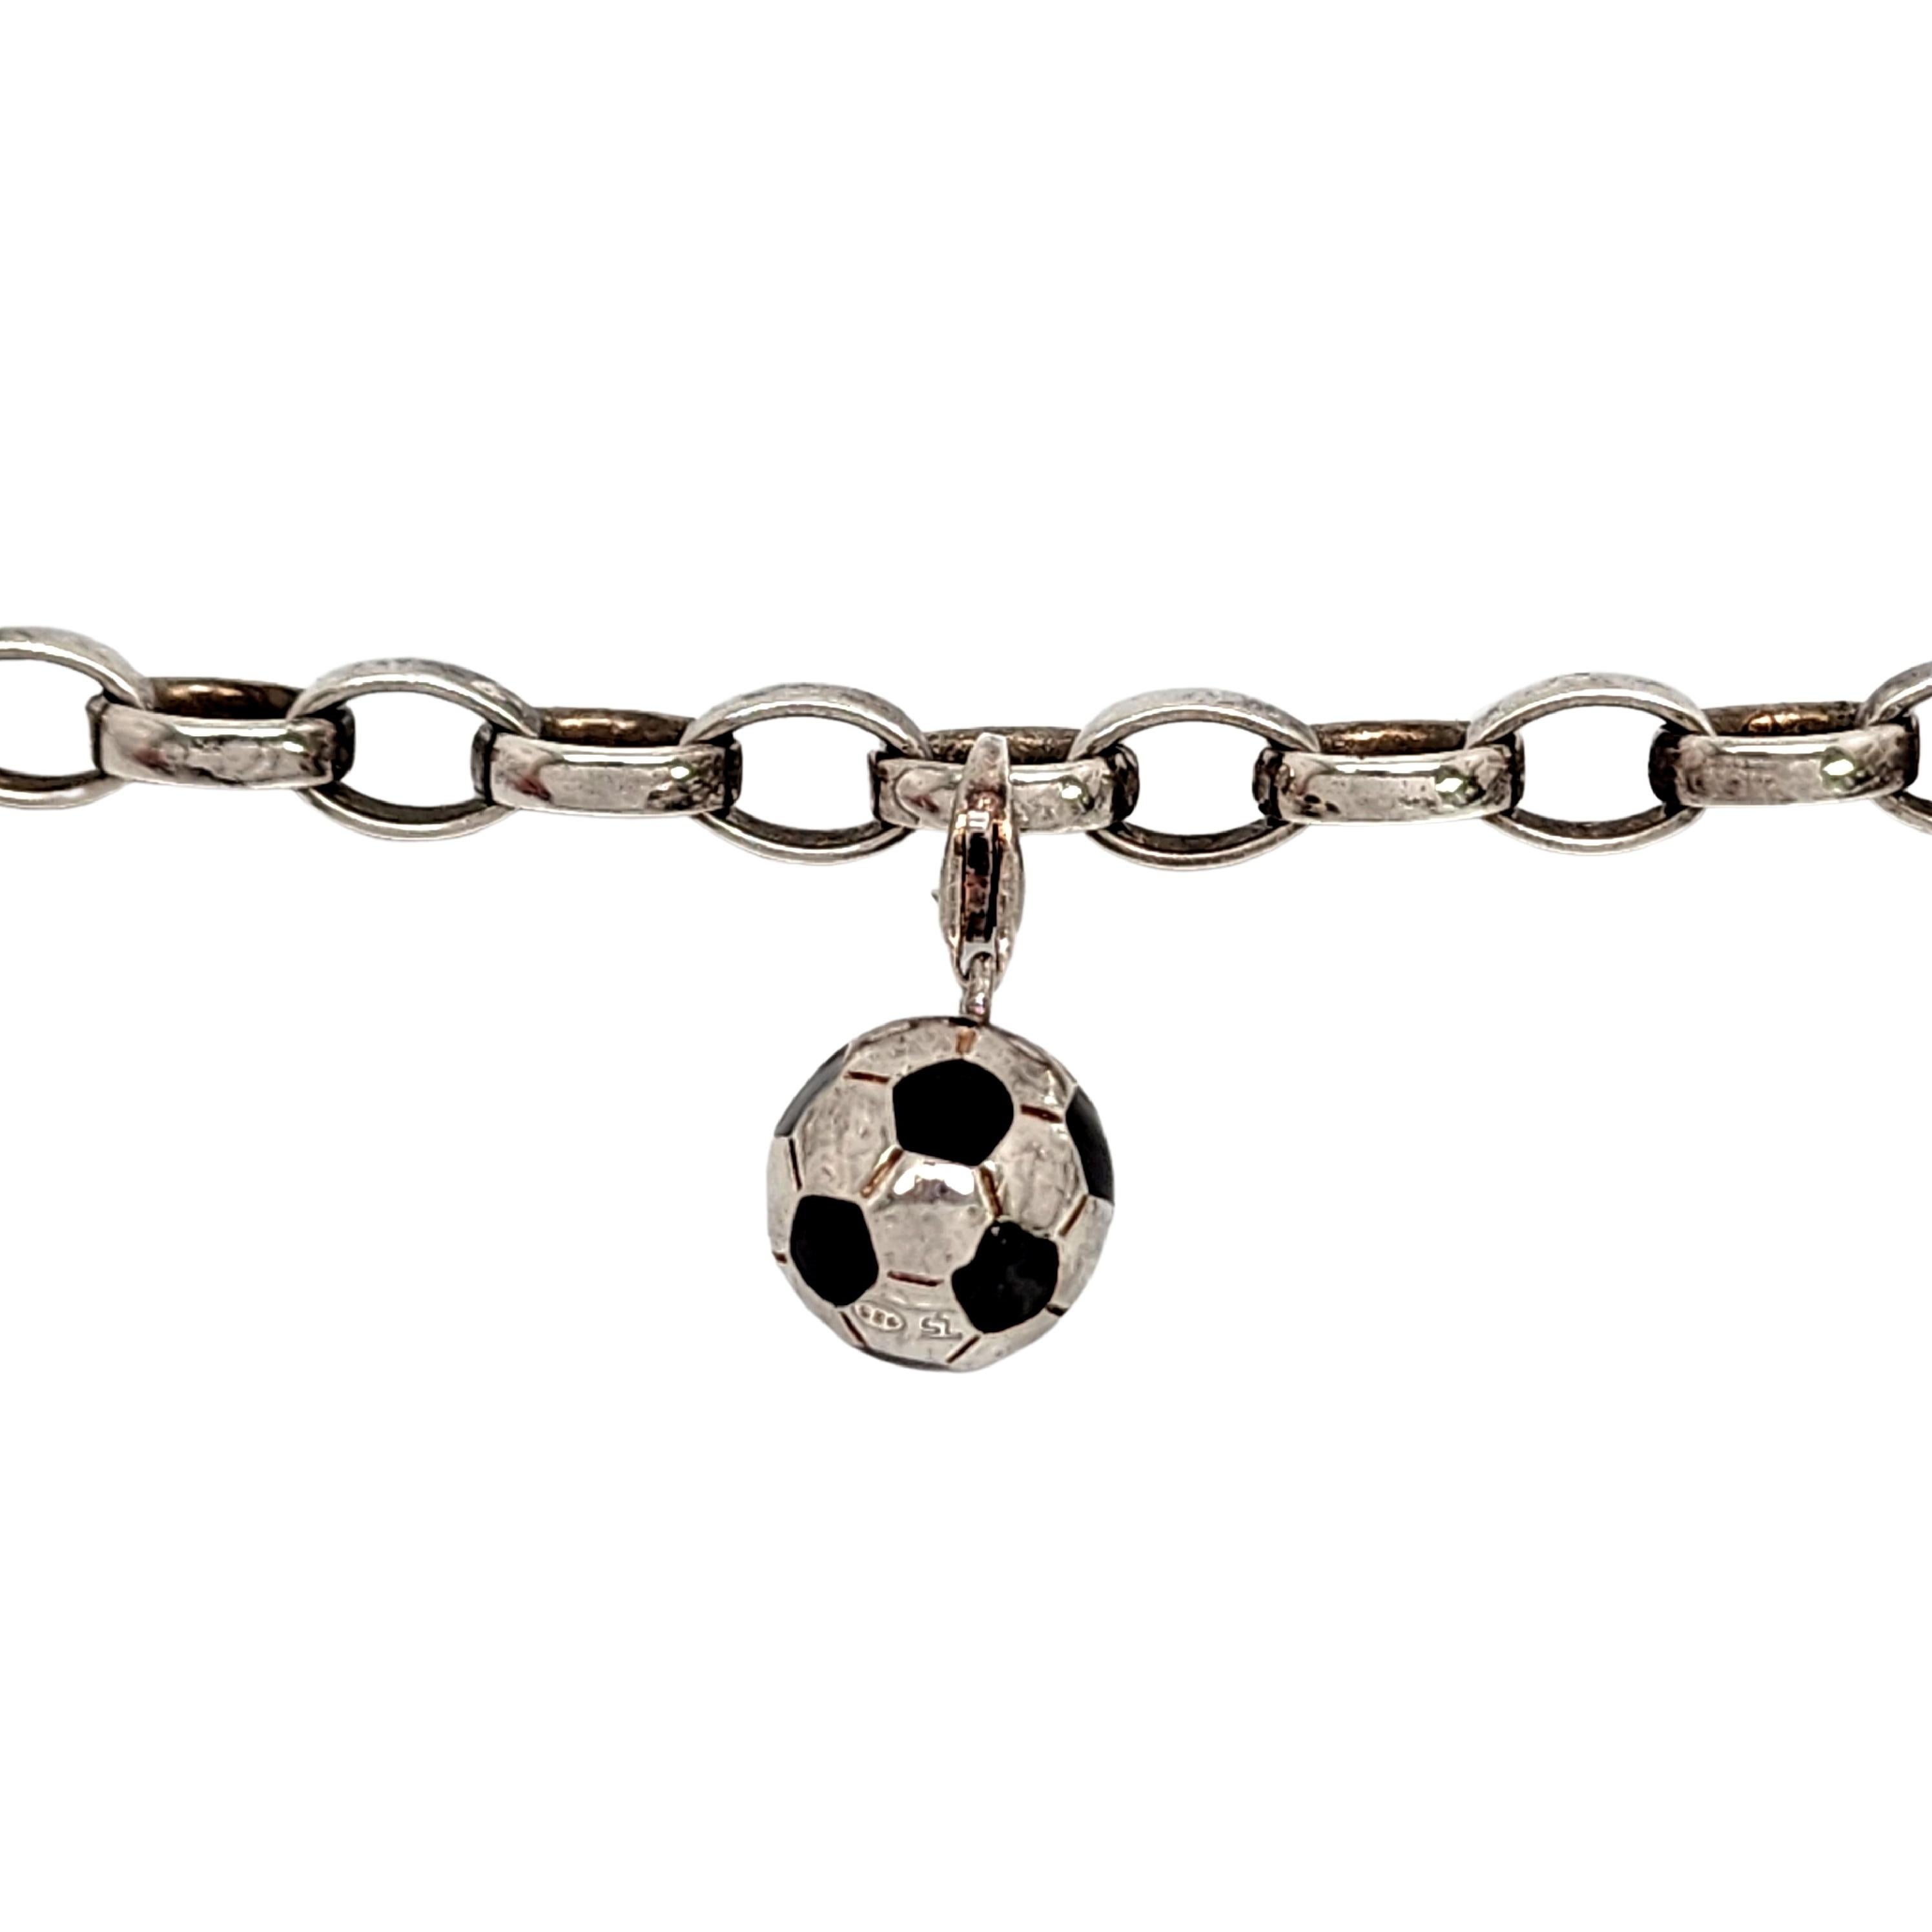 Women's Thomas Sabo Charm Club SS Bracelet with Soccer Ball and Leaf Charms #14459 For Sale